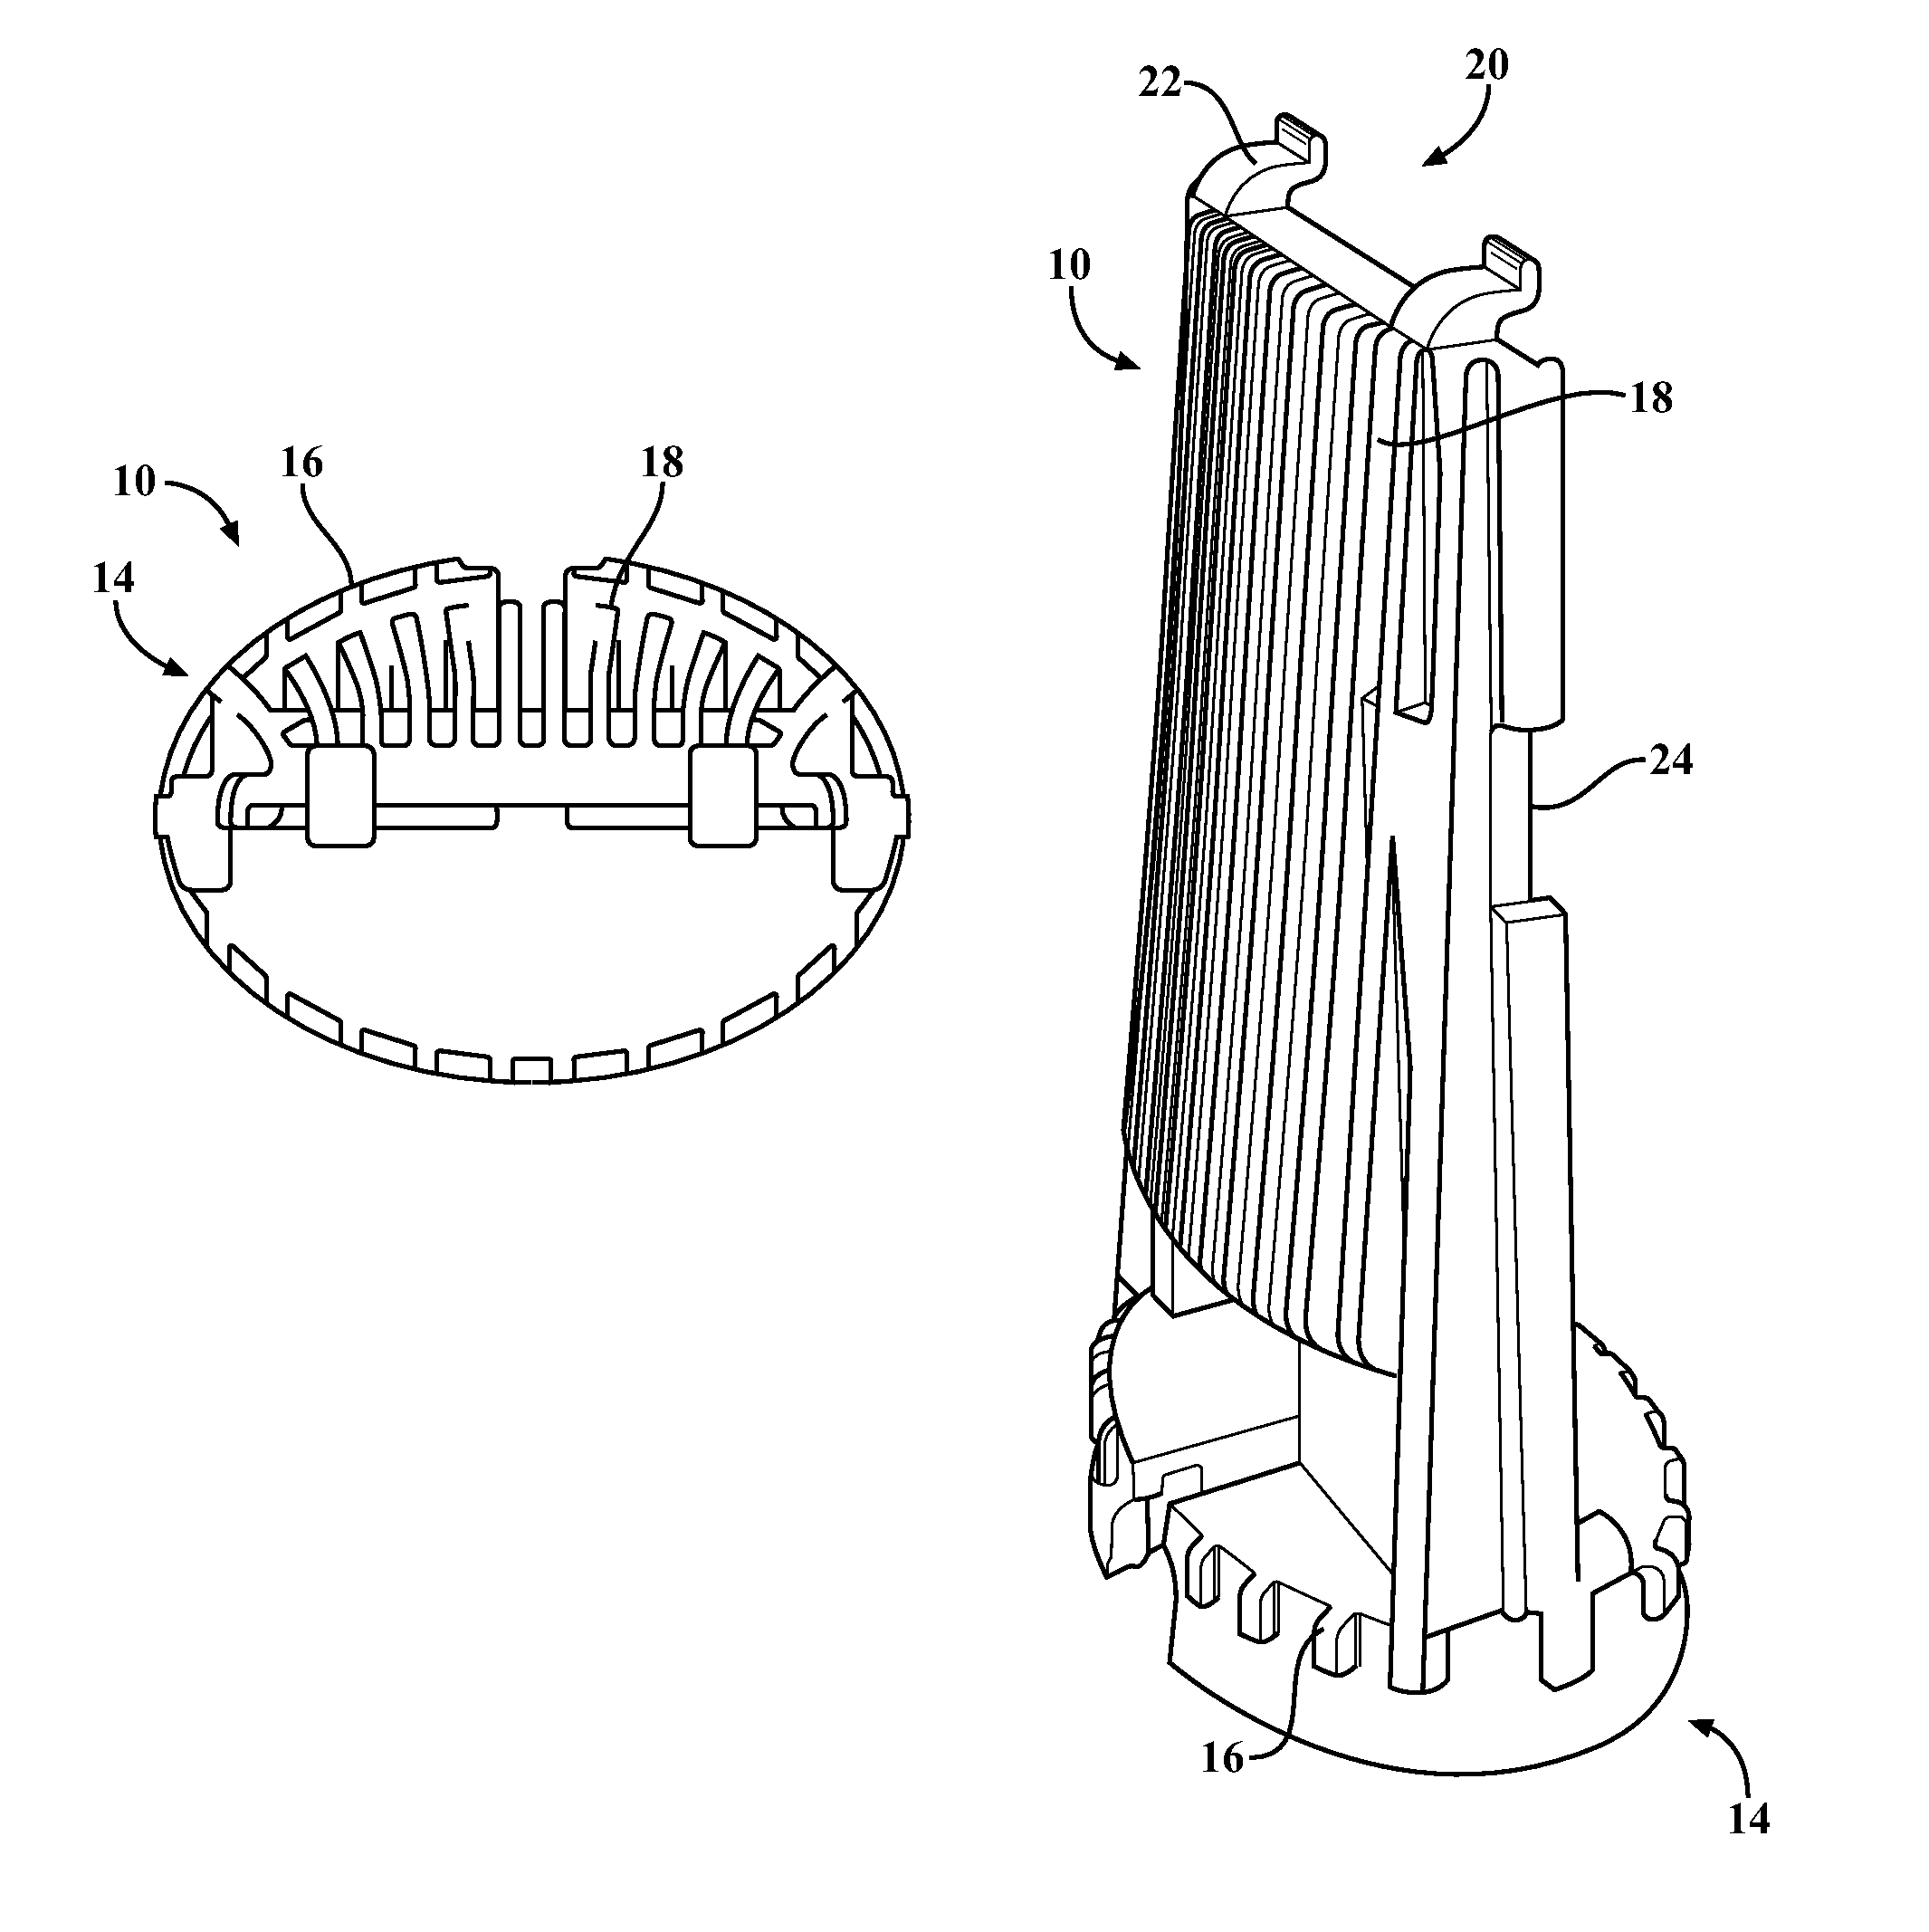 Heat sink assembly and method of utilizing a heat sink assembly